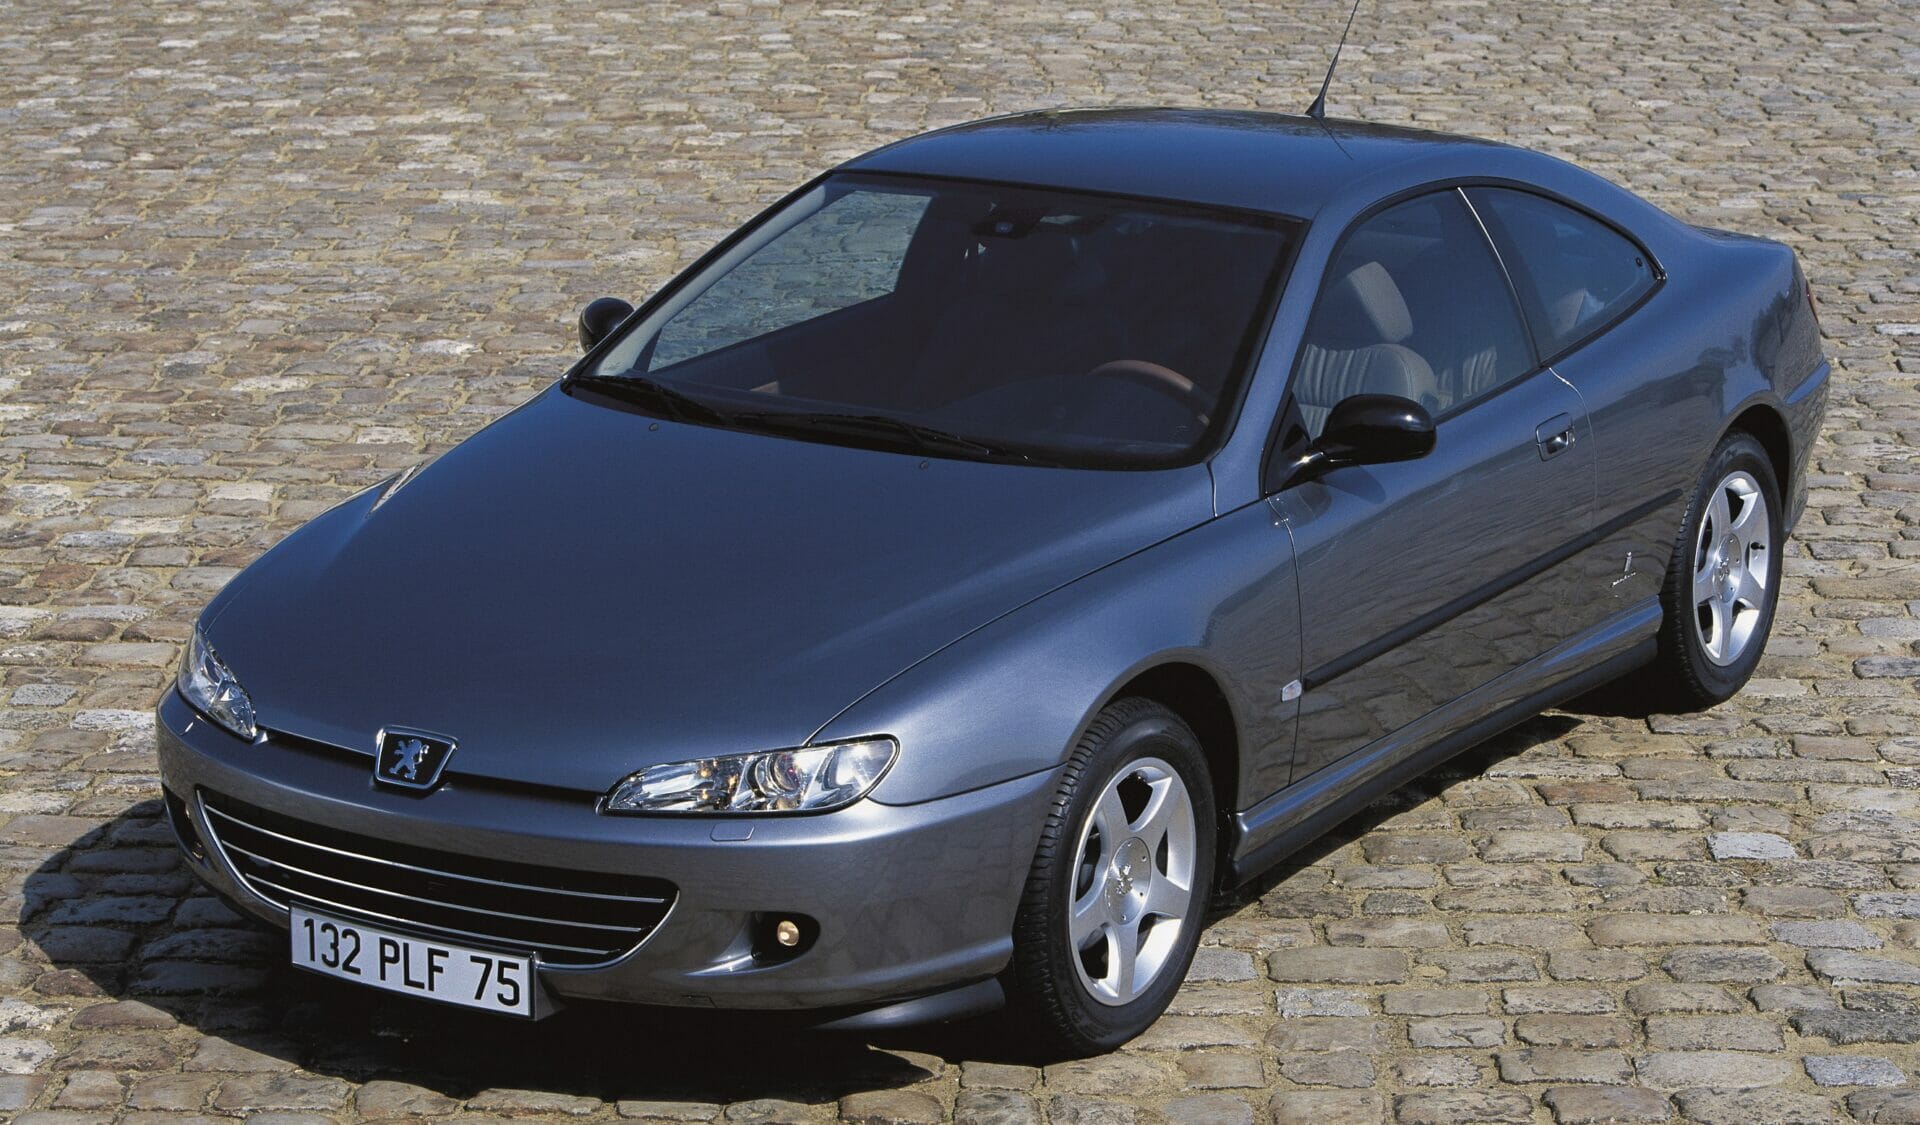 Street-Spotted: Peugeot 406 Coupe